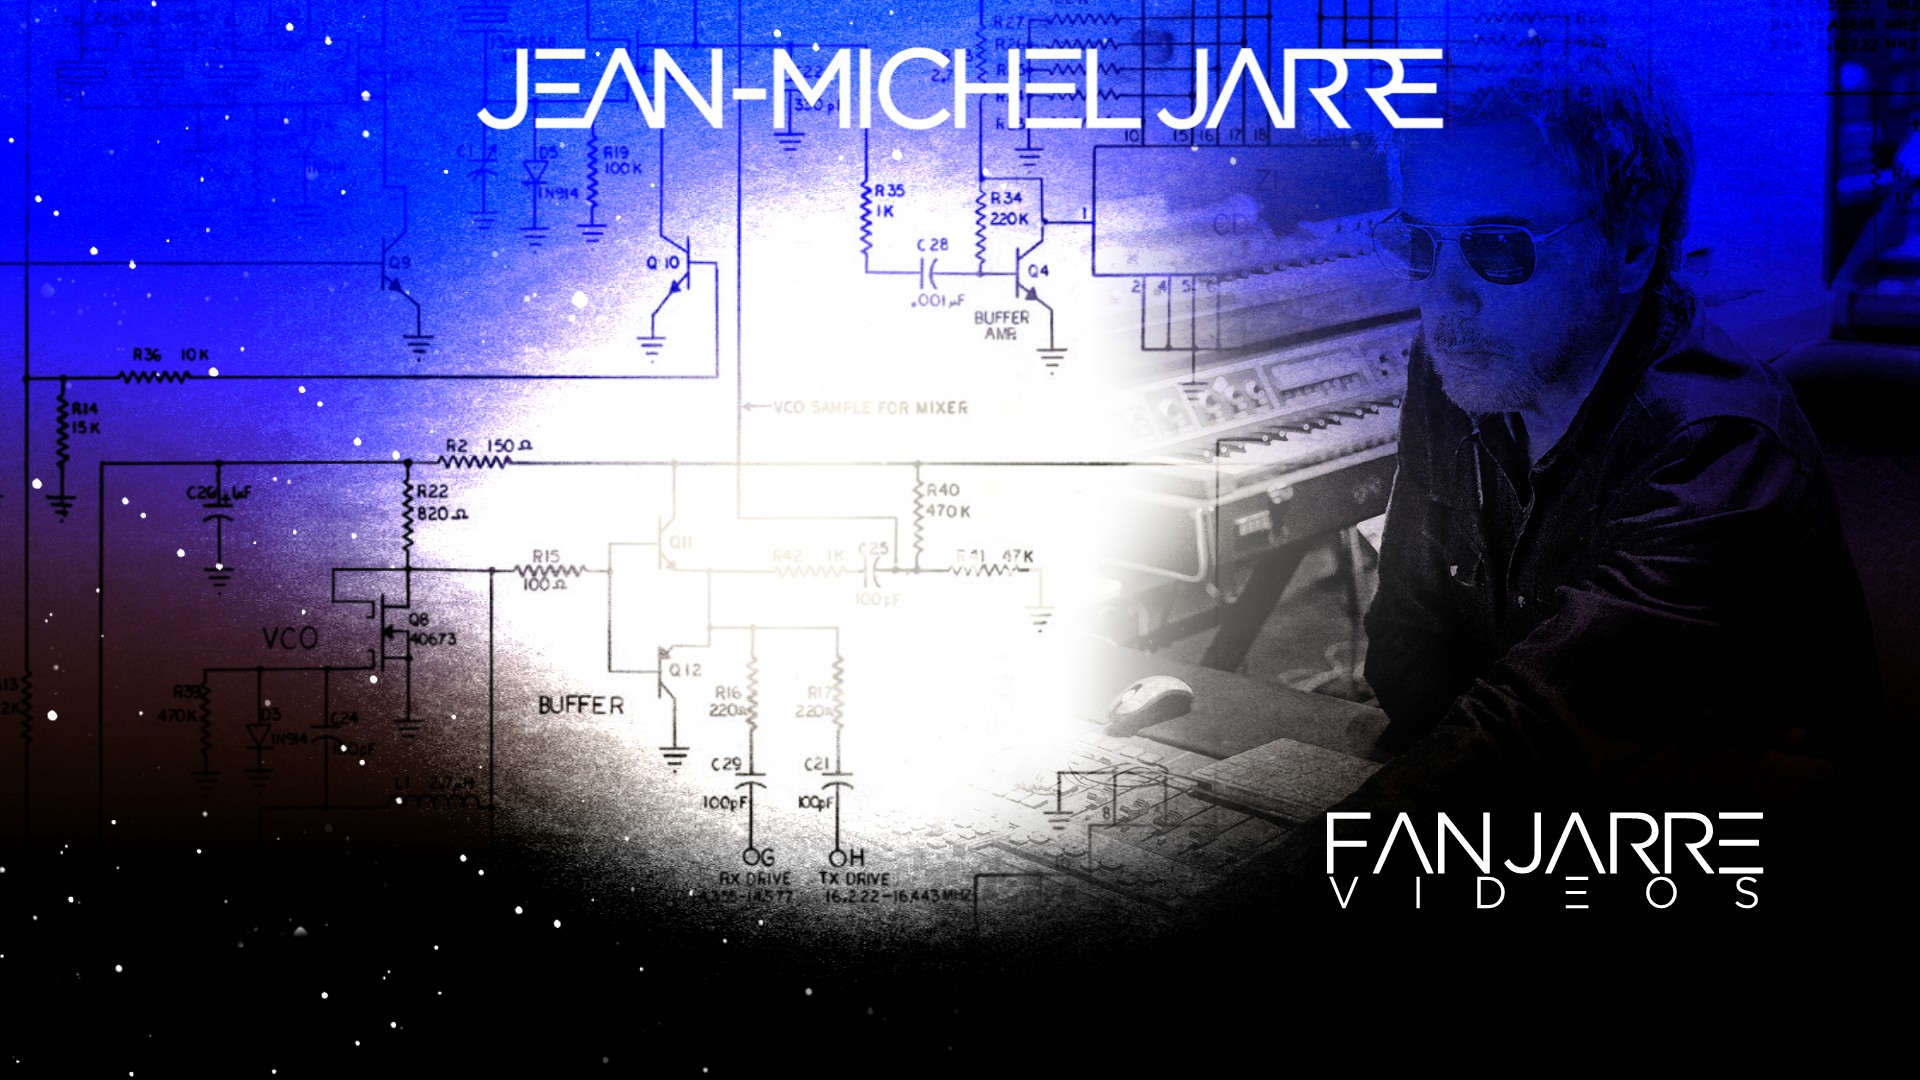 General 1920x1080 Jean Michel Jarre electronic music numbers men music French musician digital art text